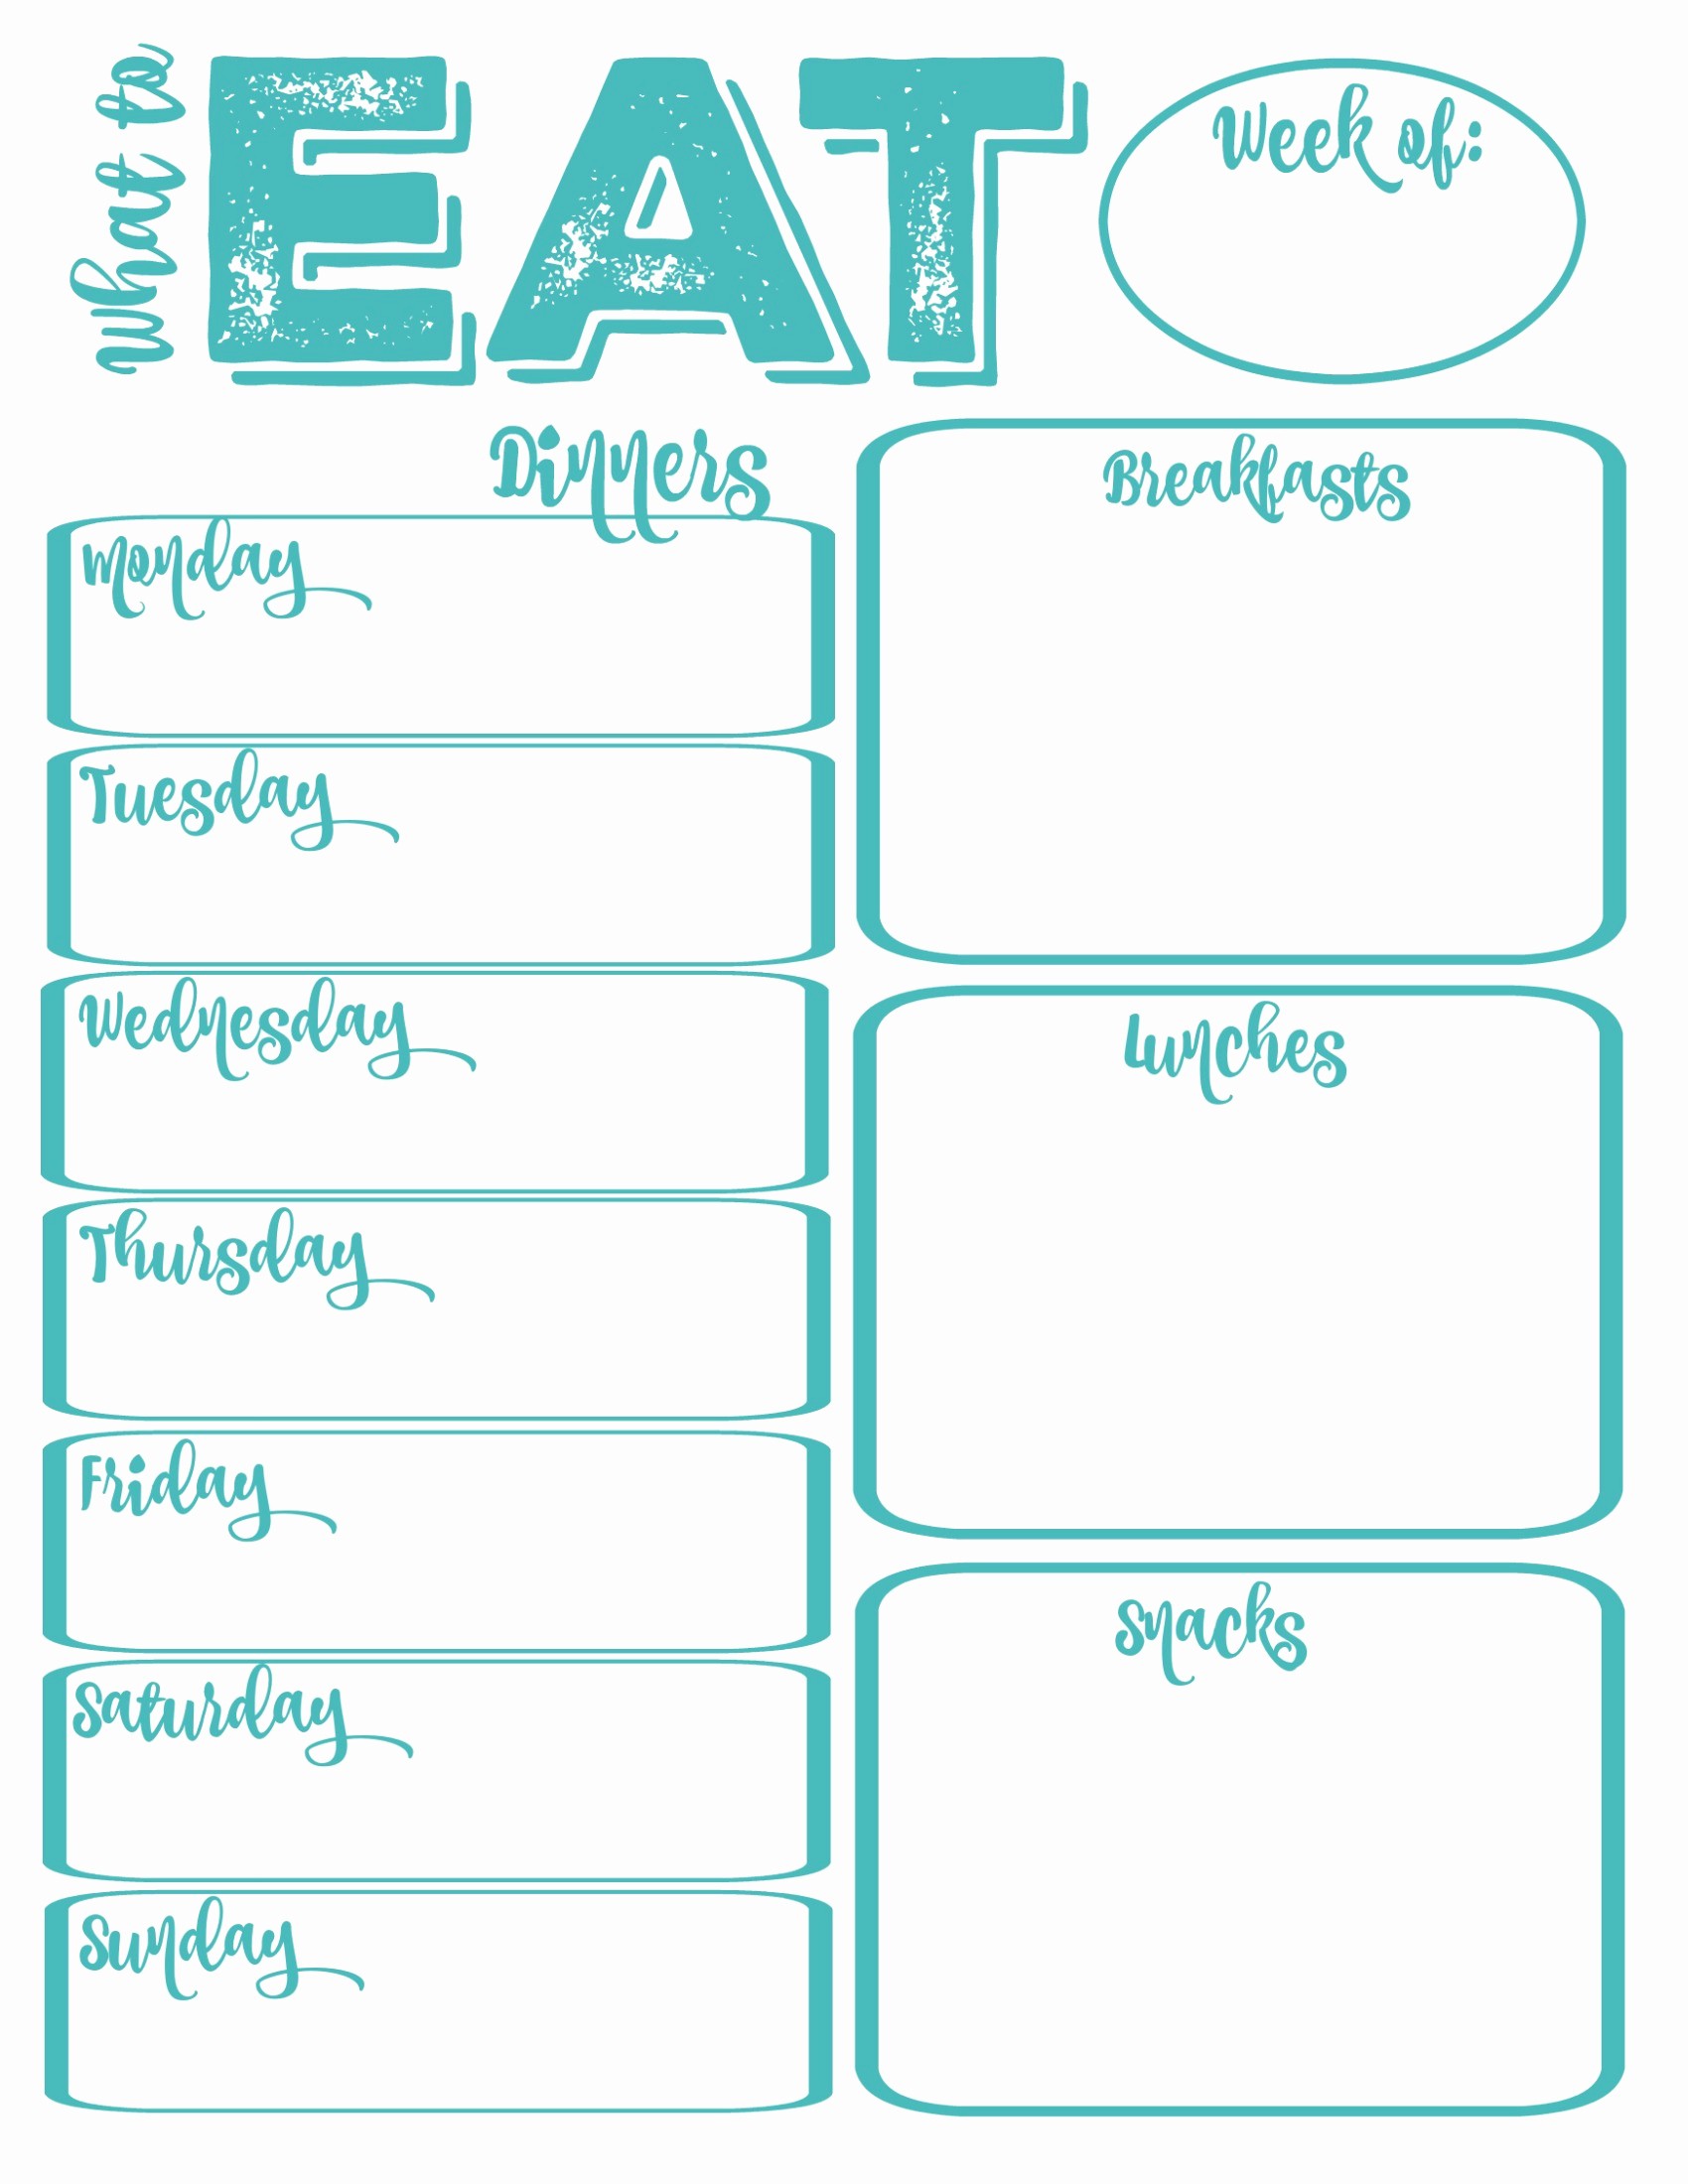 Weekly Meal Plan Template Free Unique Pantry Makeover Free Printable Weekly Meal Planner and